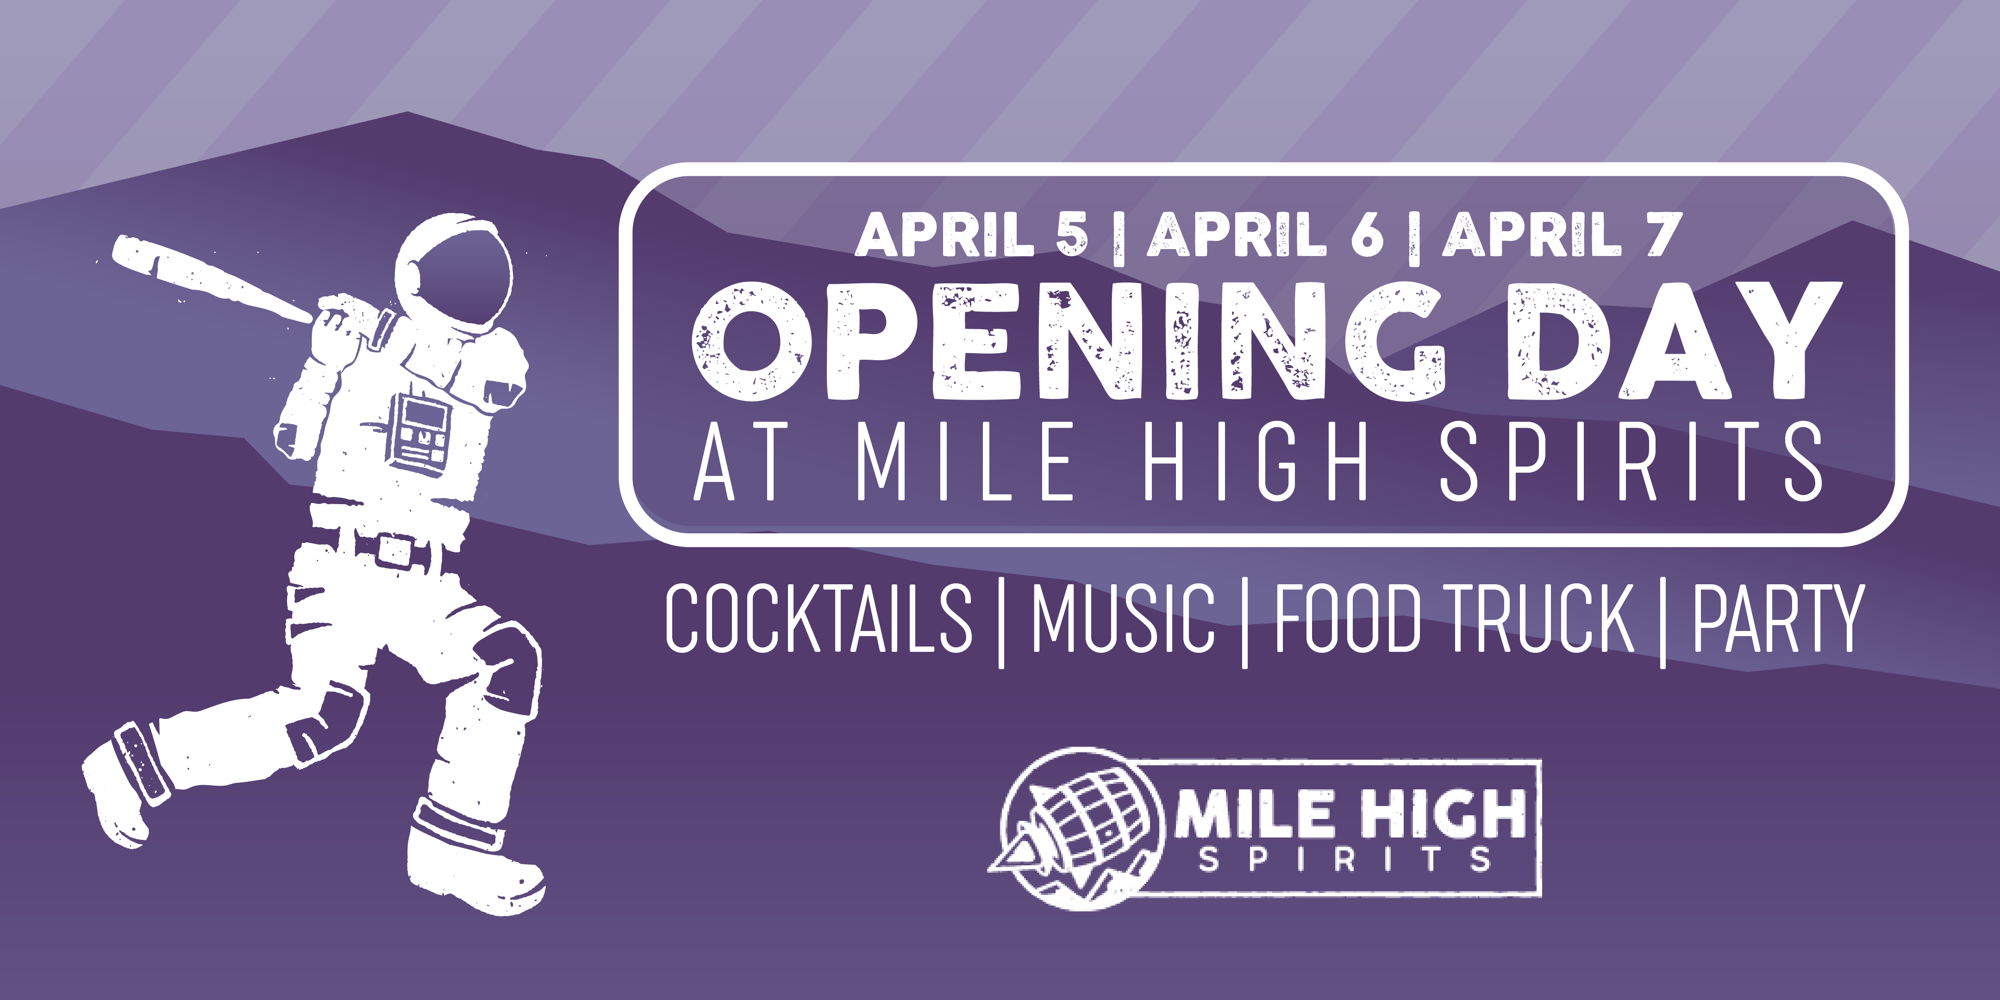 OPENING DAY at Mile High Spirits promotional image